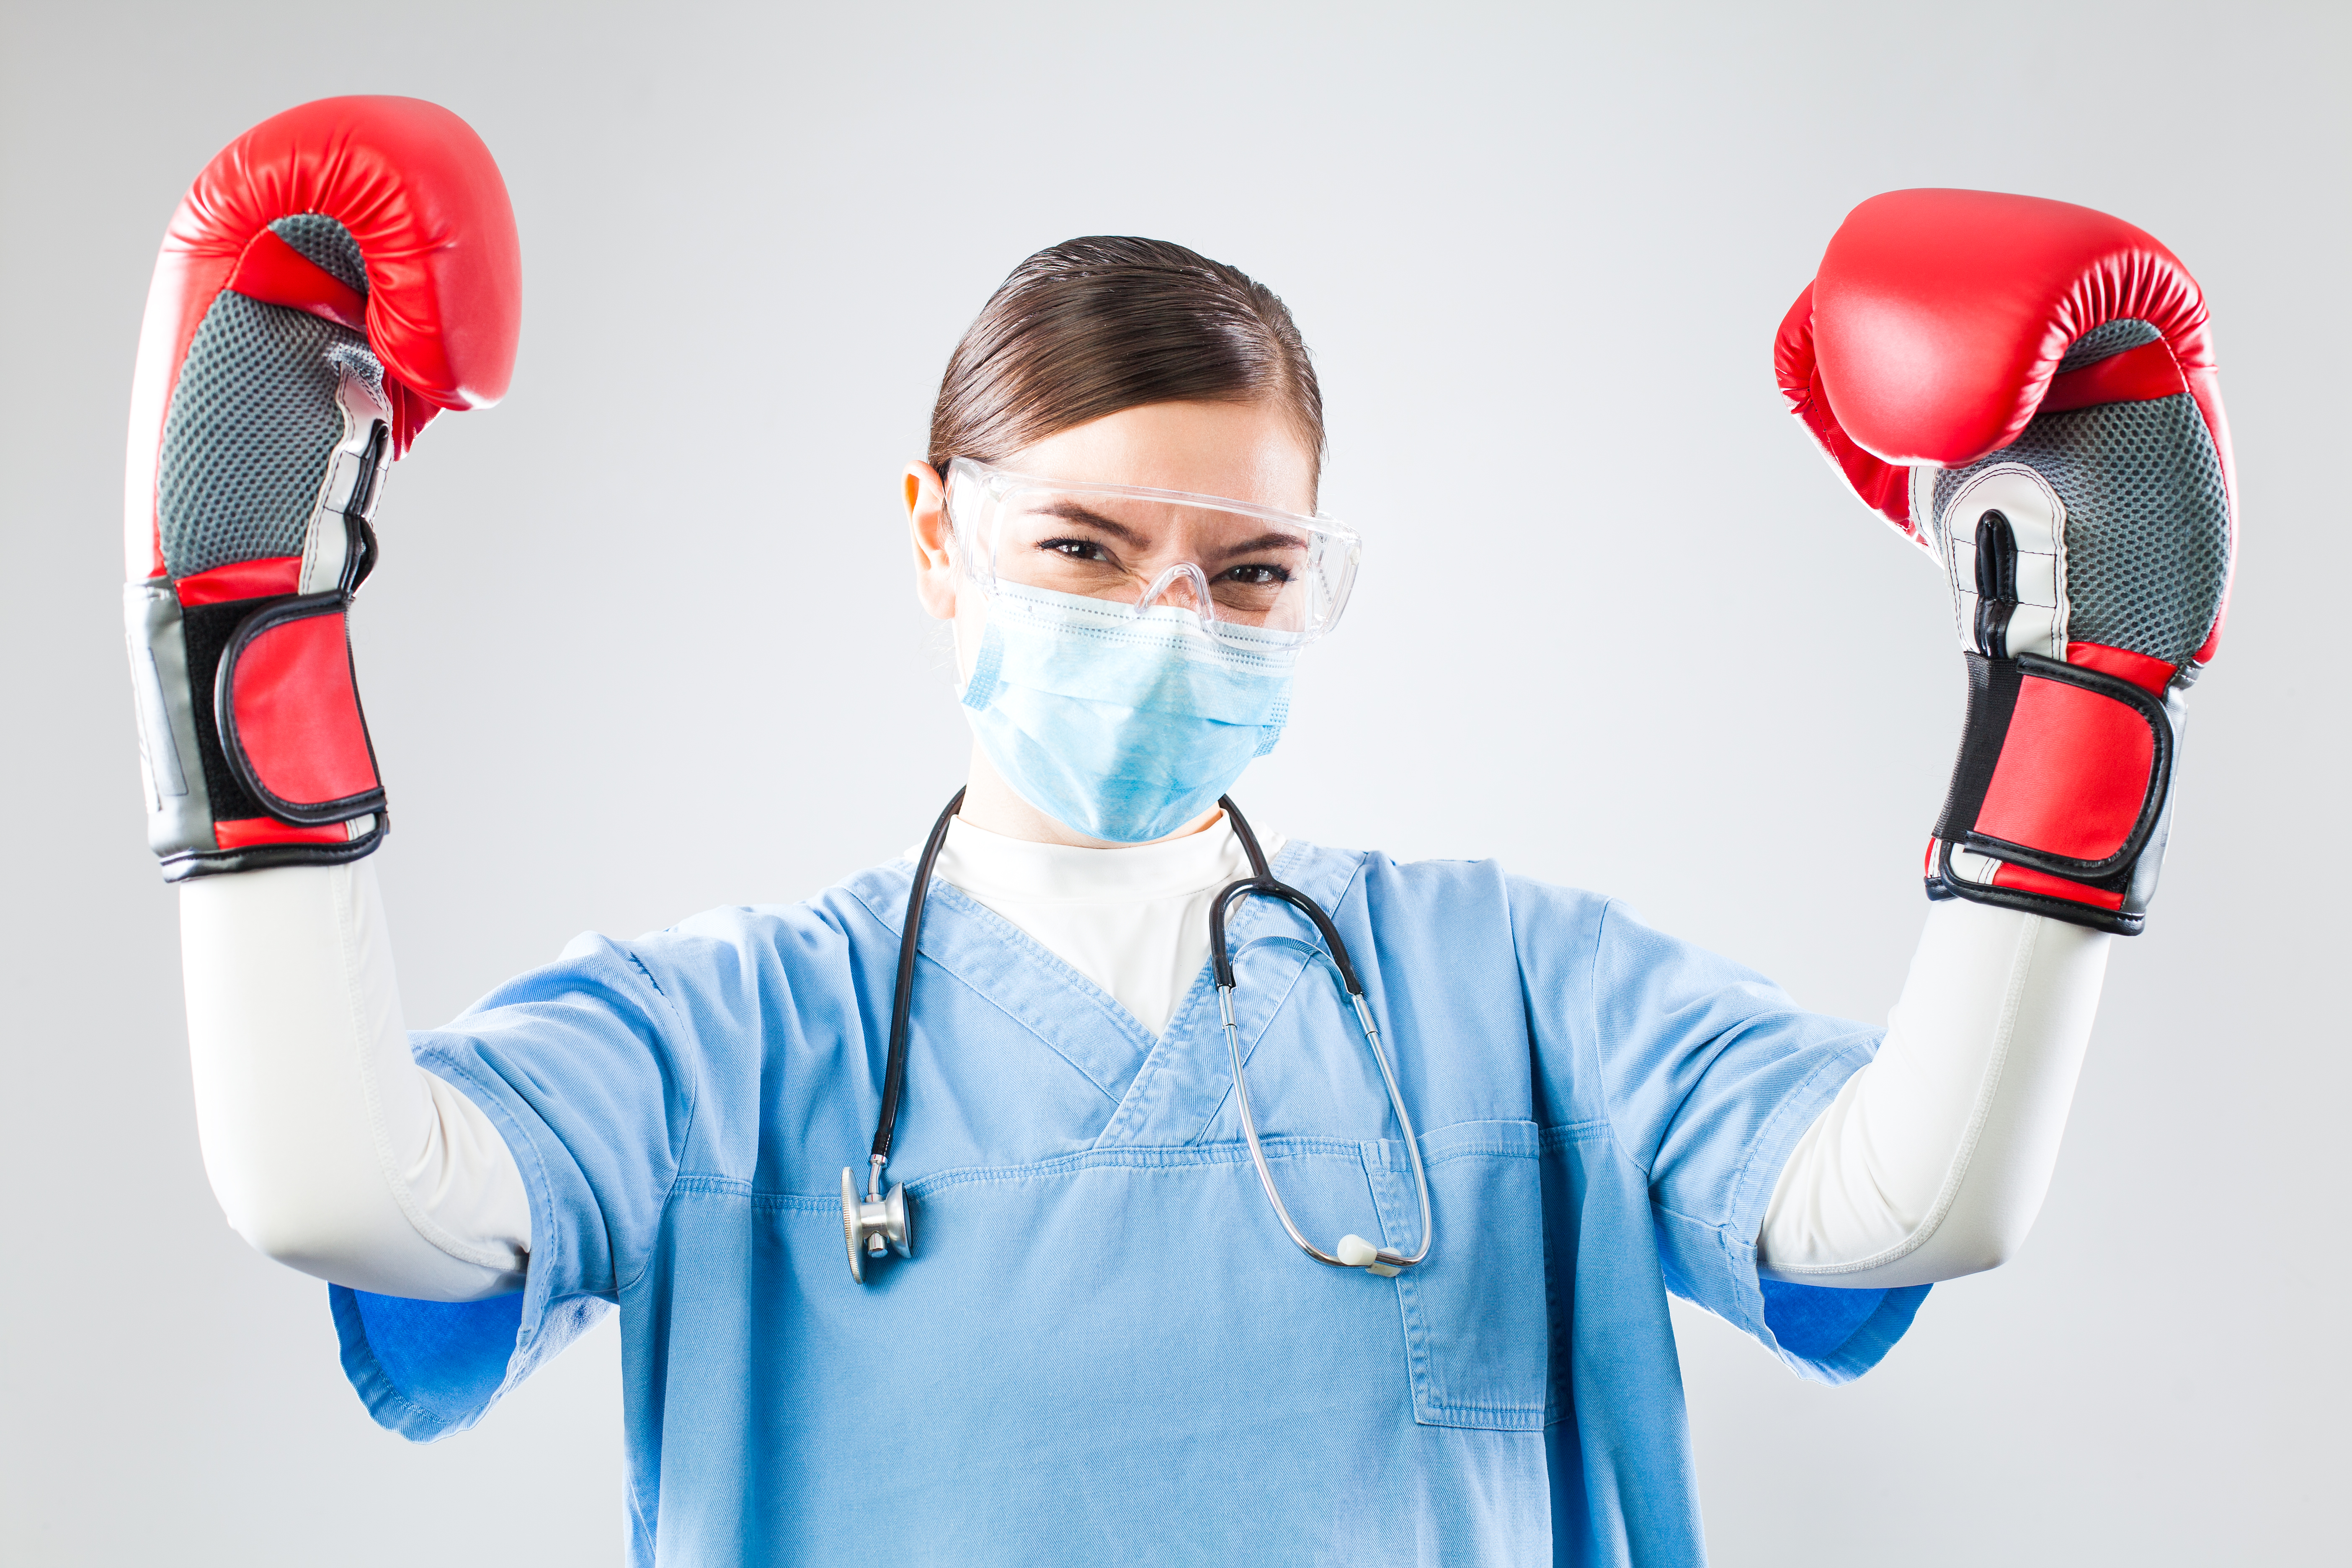 Female Doctor wearing protective eye wear, a surgical mask and boxing gloves. 